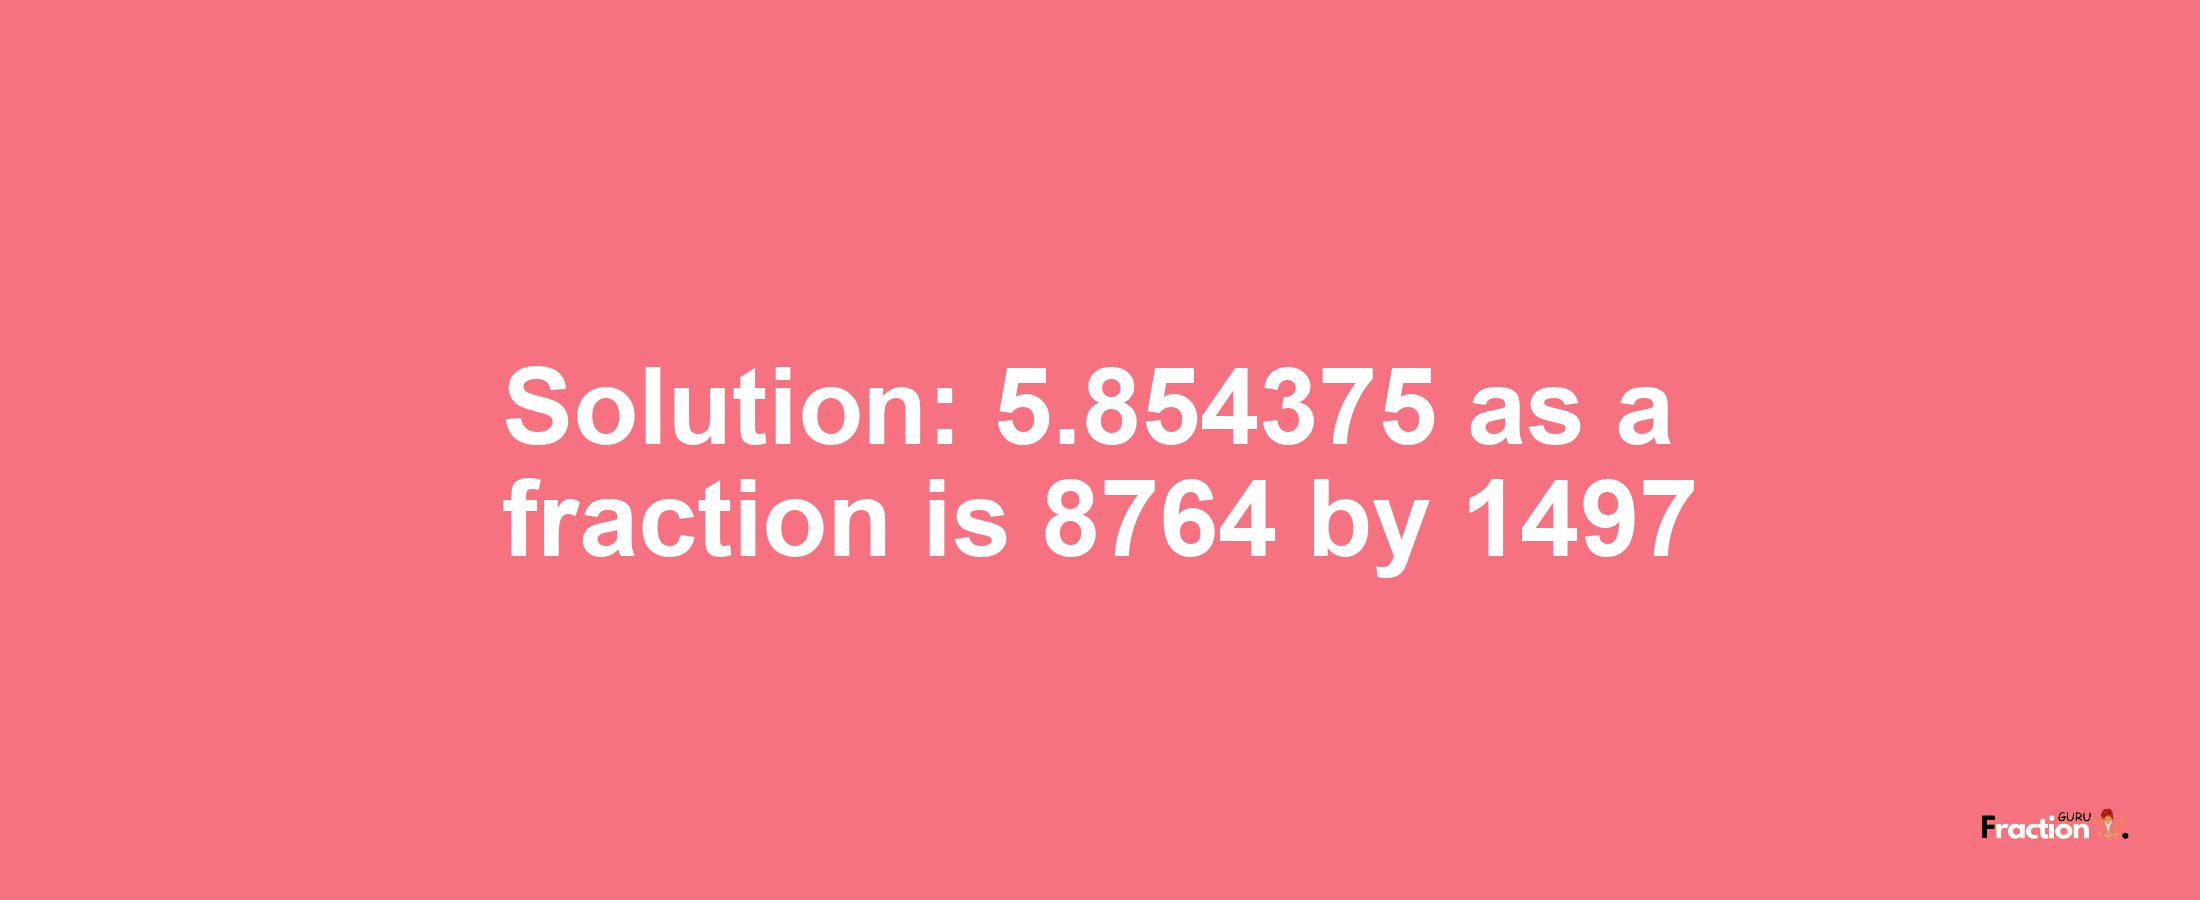 Solution:5.854375 as a fraction is 8764/1497